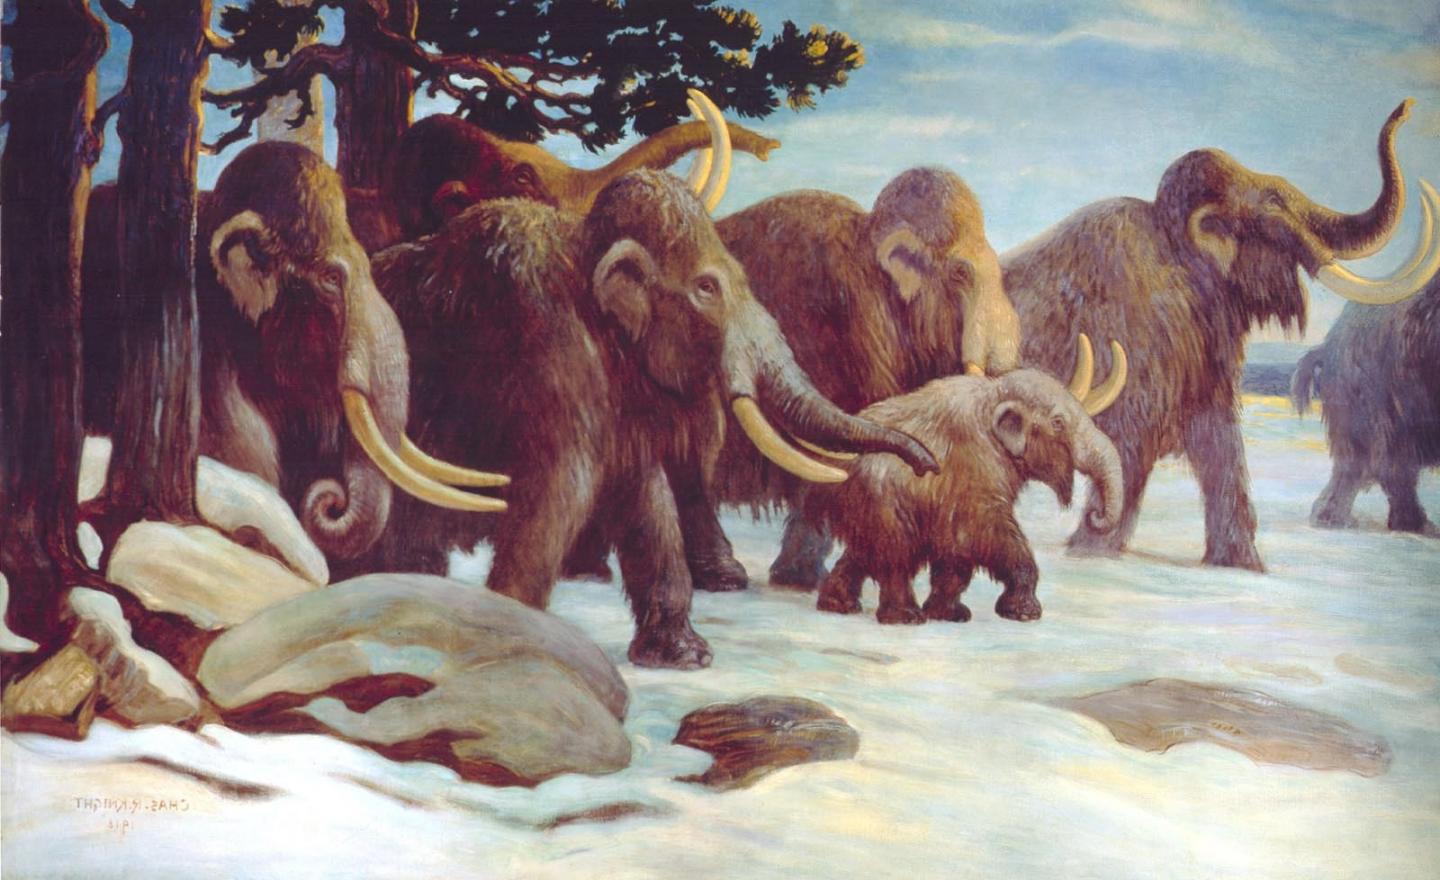 Group of Mammoths